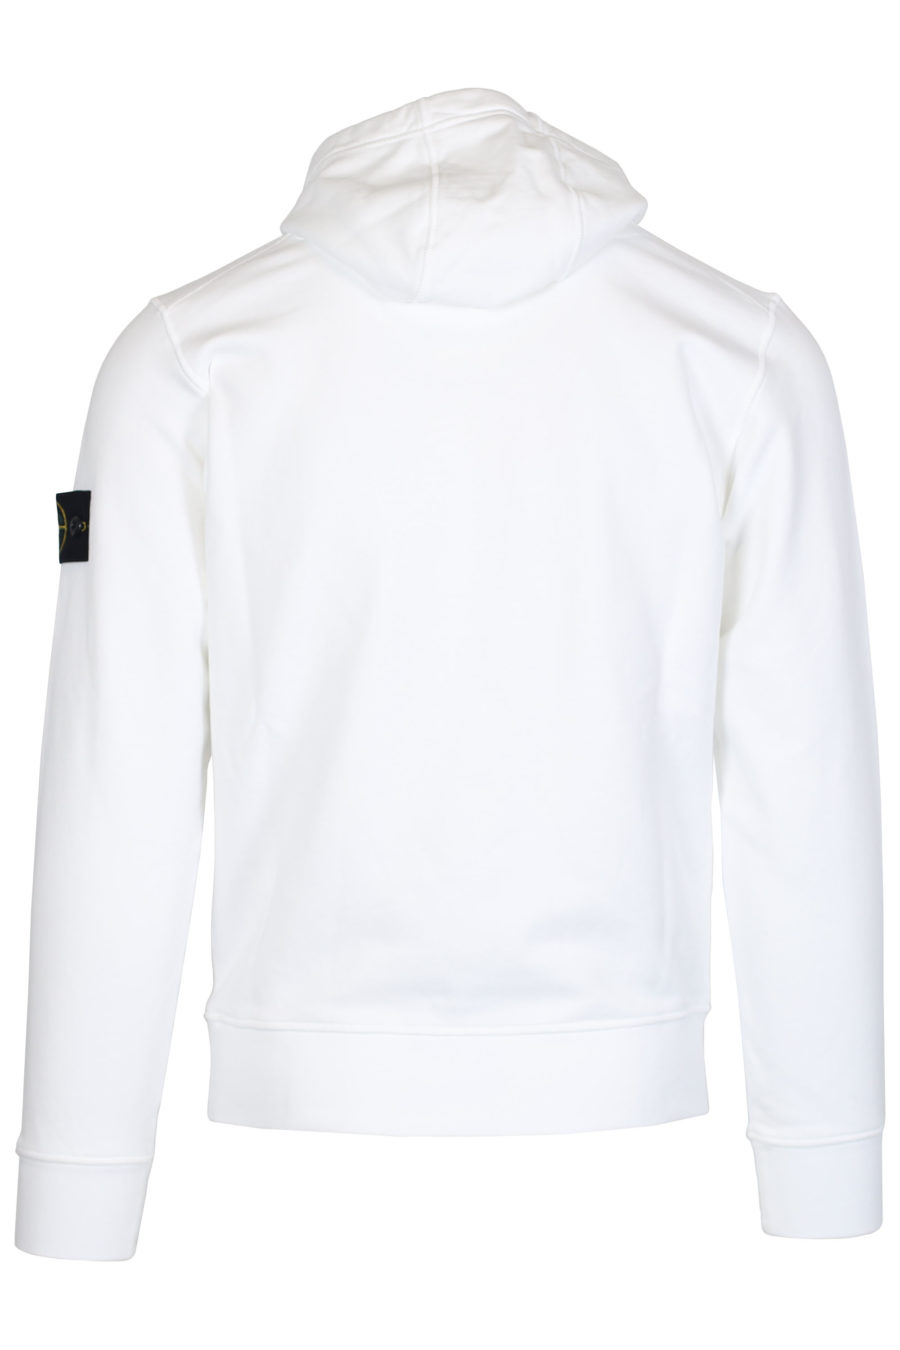 White hooded sweatshirt with logo patch - IMG 2474